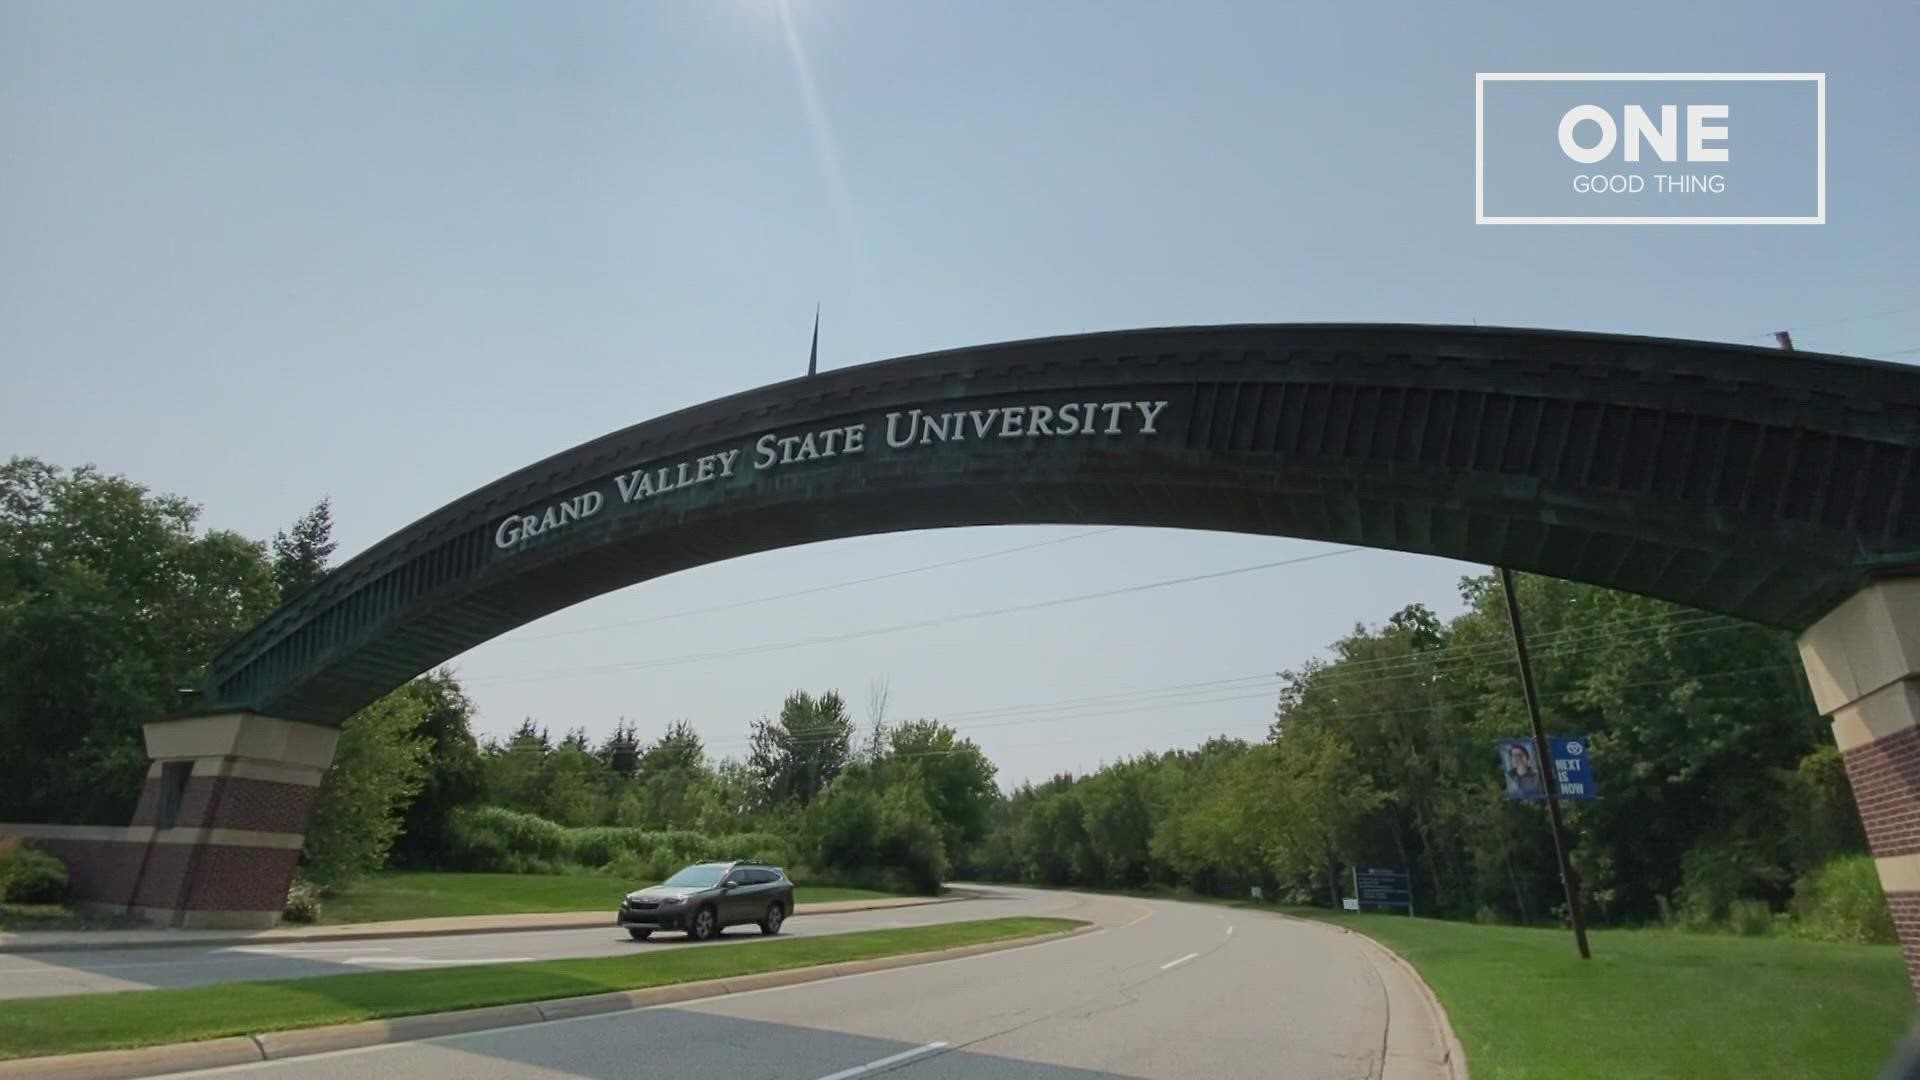 An anonymous financial gift of $2 million is allowing Grand Valley State University to build the T4 Scholarship program for students.